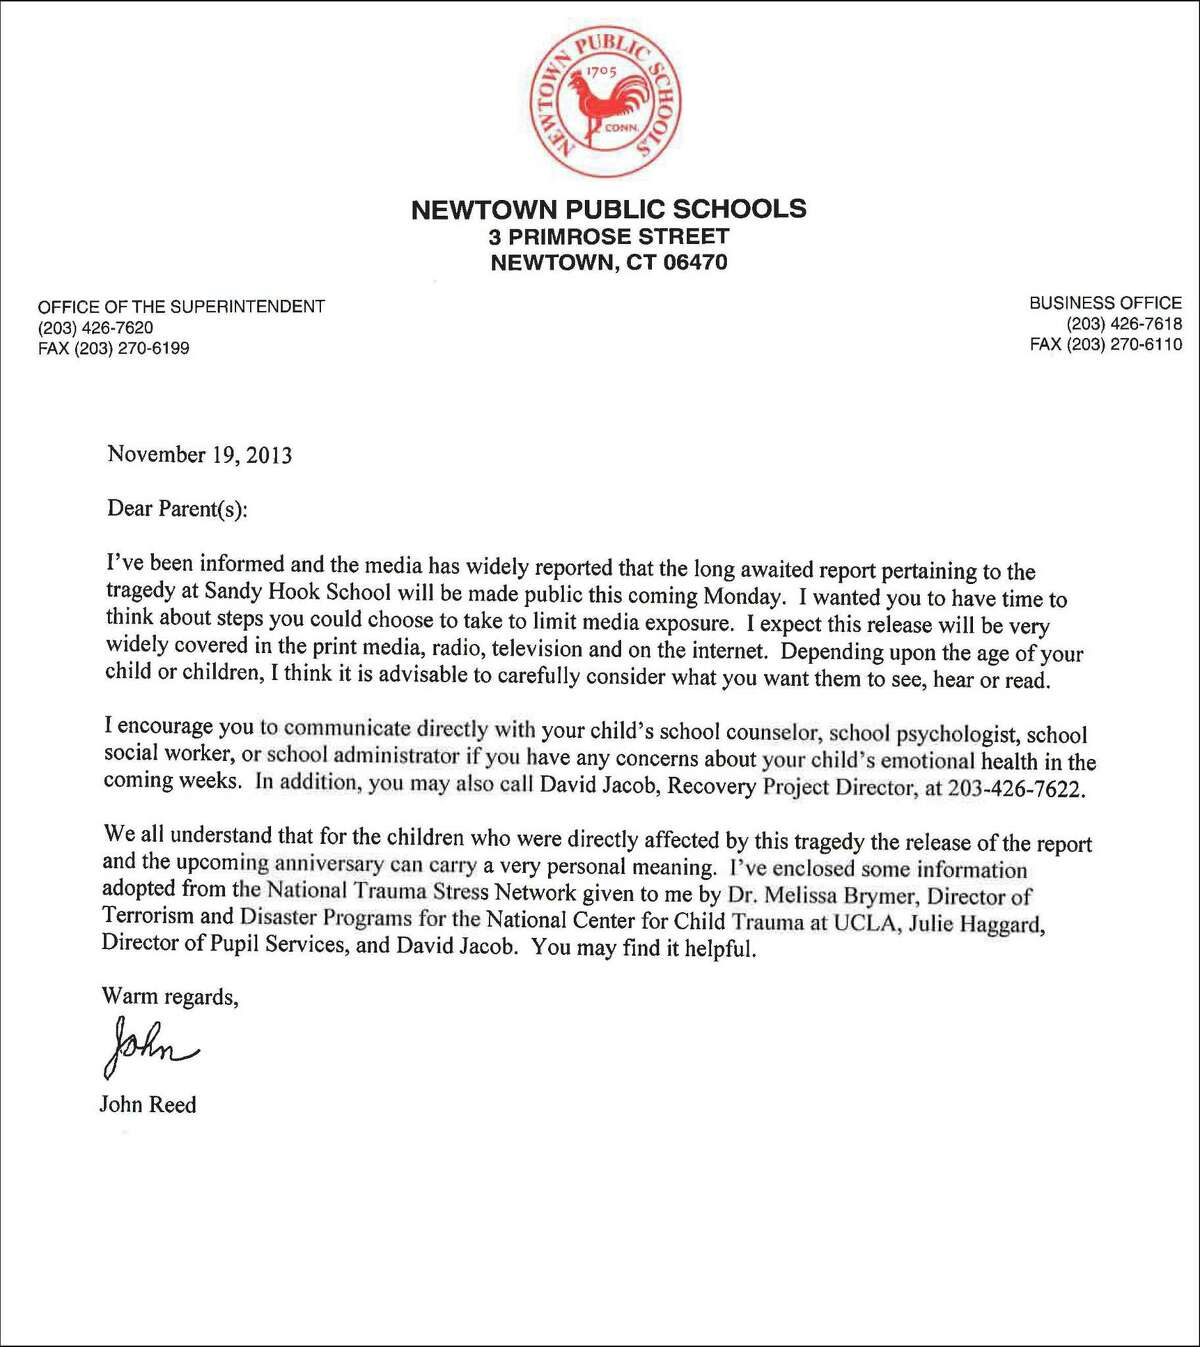 John Reed, interim superintendent of schools in Newtown, Conn. sent this letter to parents warning them that the Sandy hook report is expected to be released Monday, Nov. 25, 2013.